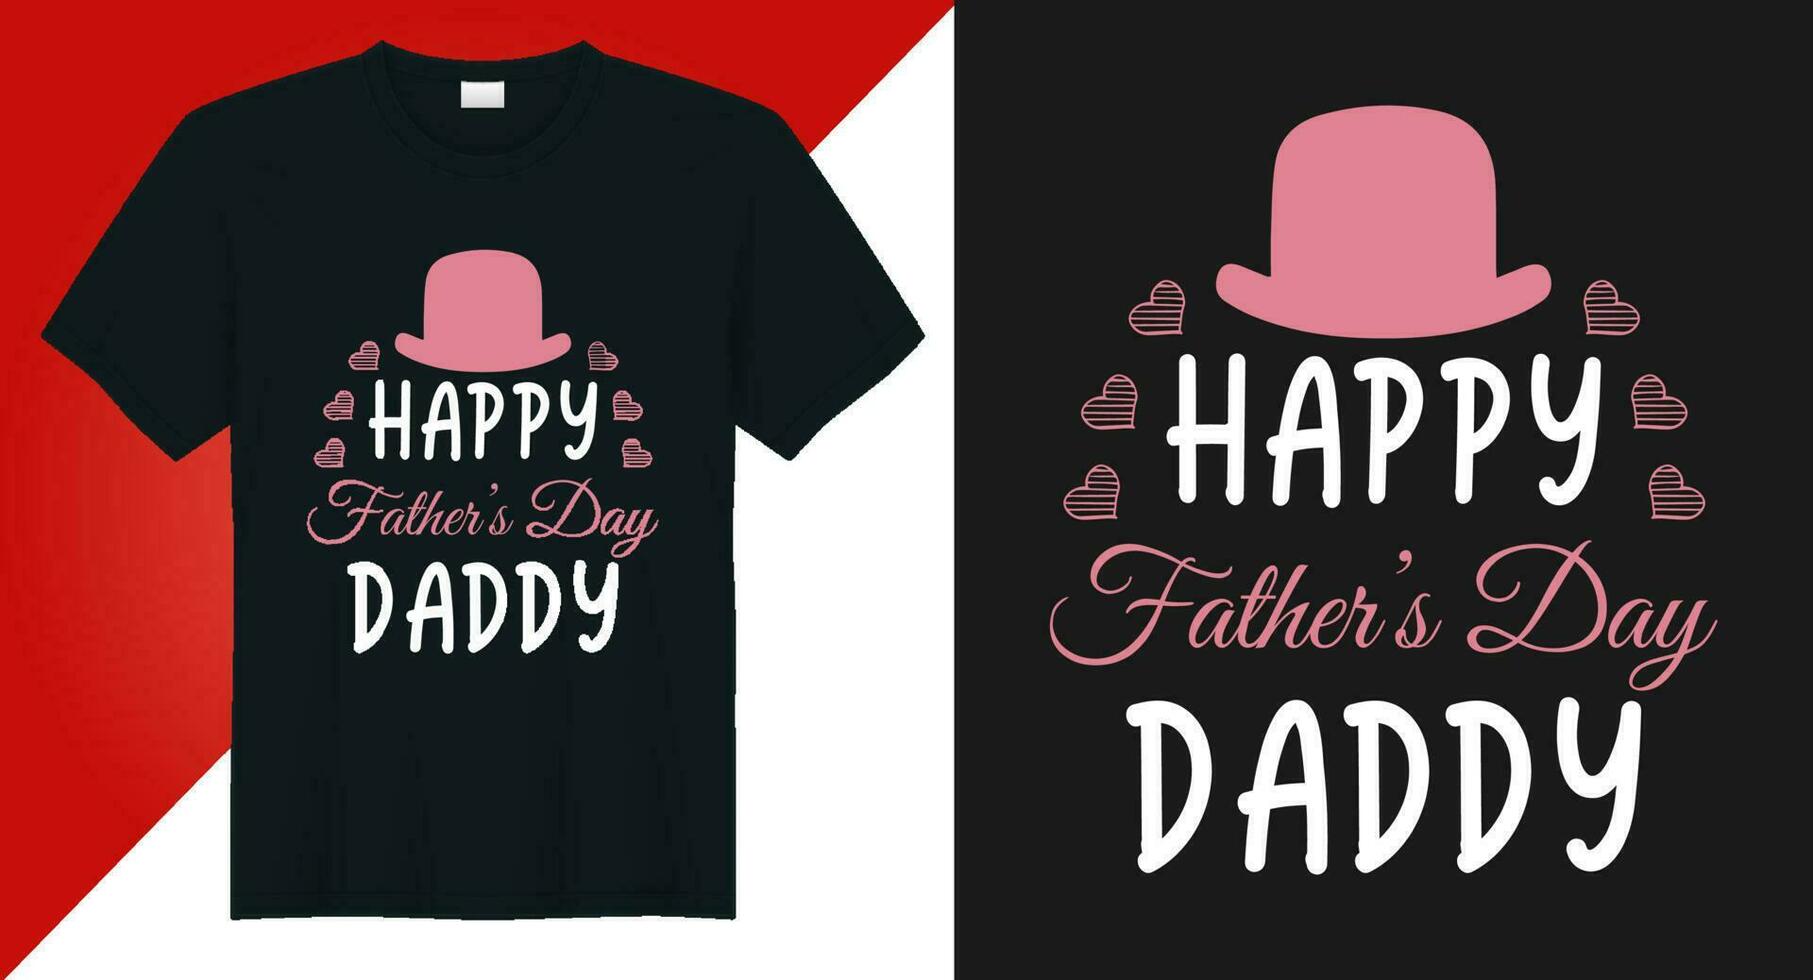 Fathers day Saying and Quotes, Father's Day typography vector tshirt design template